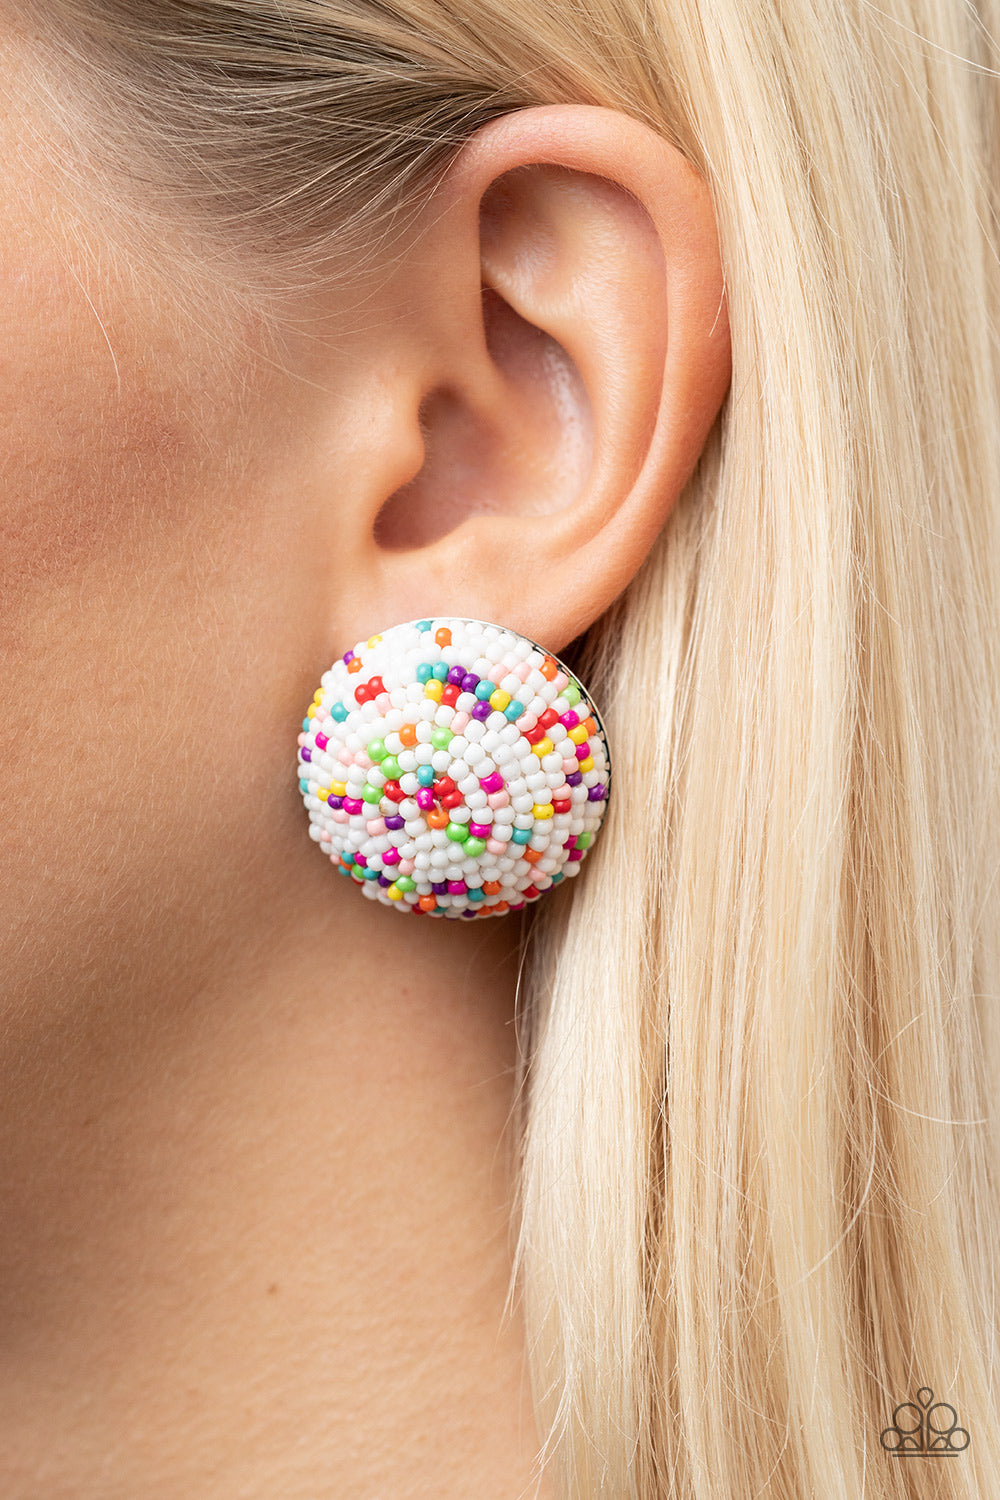 Kaleidoscope Sky - White - Multi Color Earrings - Paparazzi Accessories - dainty multicolored beads spins around the front of an oversized and beveled silver frame, resulting in a boisterous pop of kaleidoscopic color.